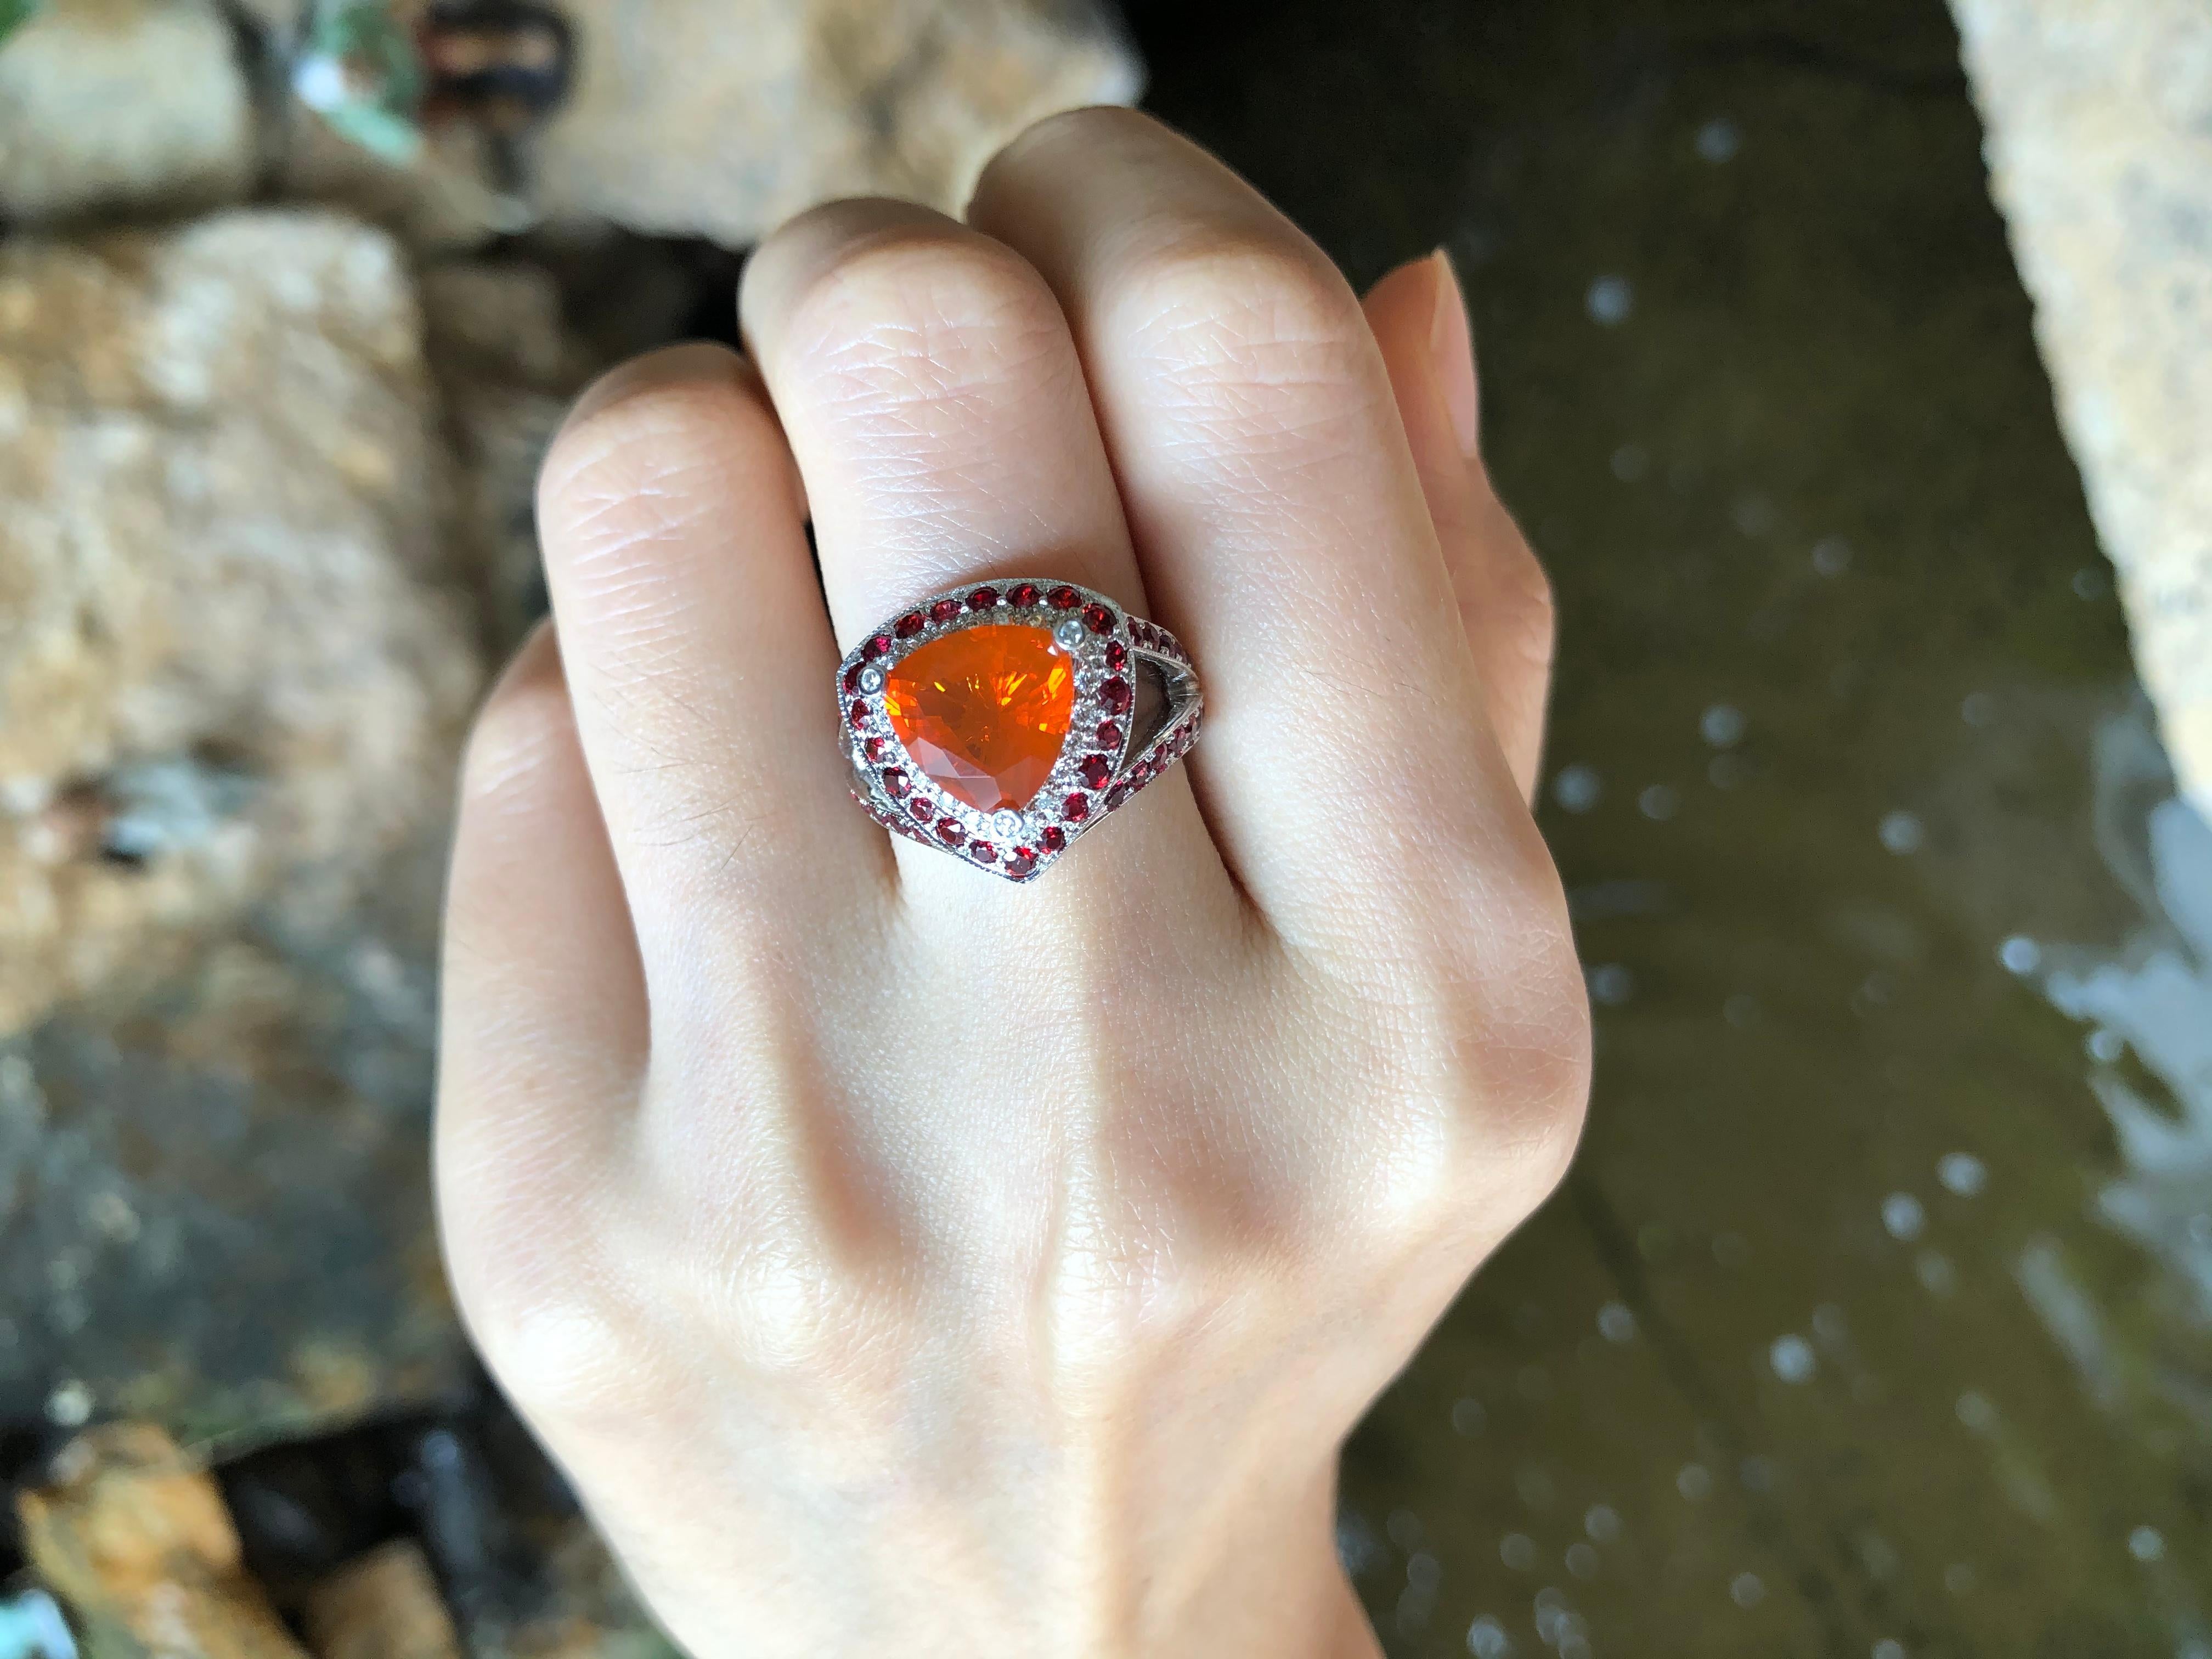 Fire Opal 2.25 carats with Orange Sapphire 1.63 carats and Diamond 0.19 carat Ring set in 18 Karat White Gold Settings

Width:  1.0 cm 
Length: 1.1 cm
Ring Size: 52
Total Weight: 7.9 grams

